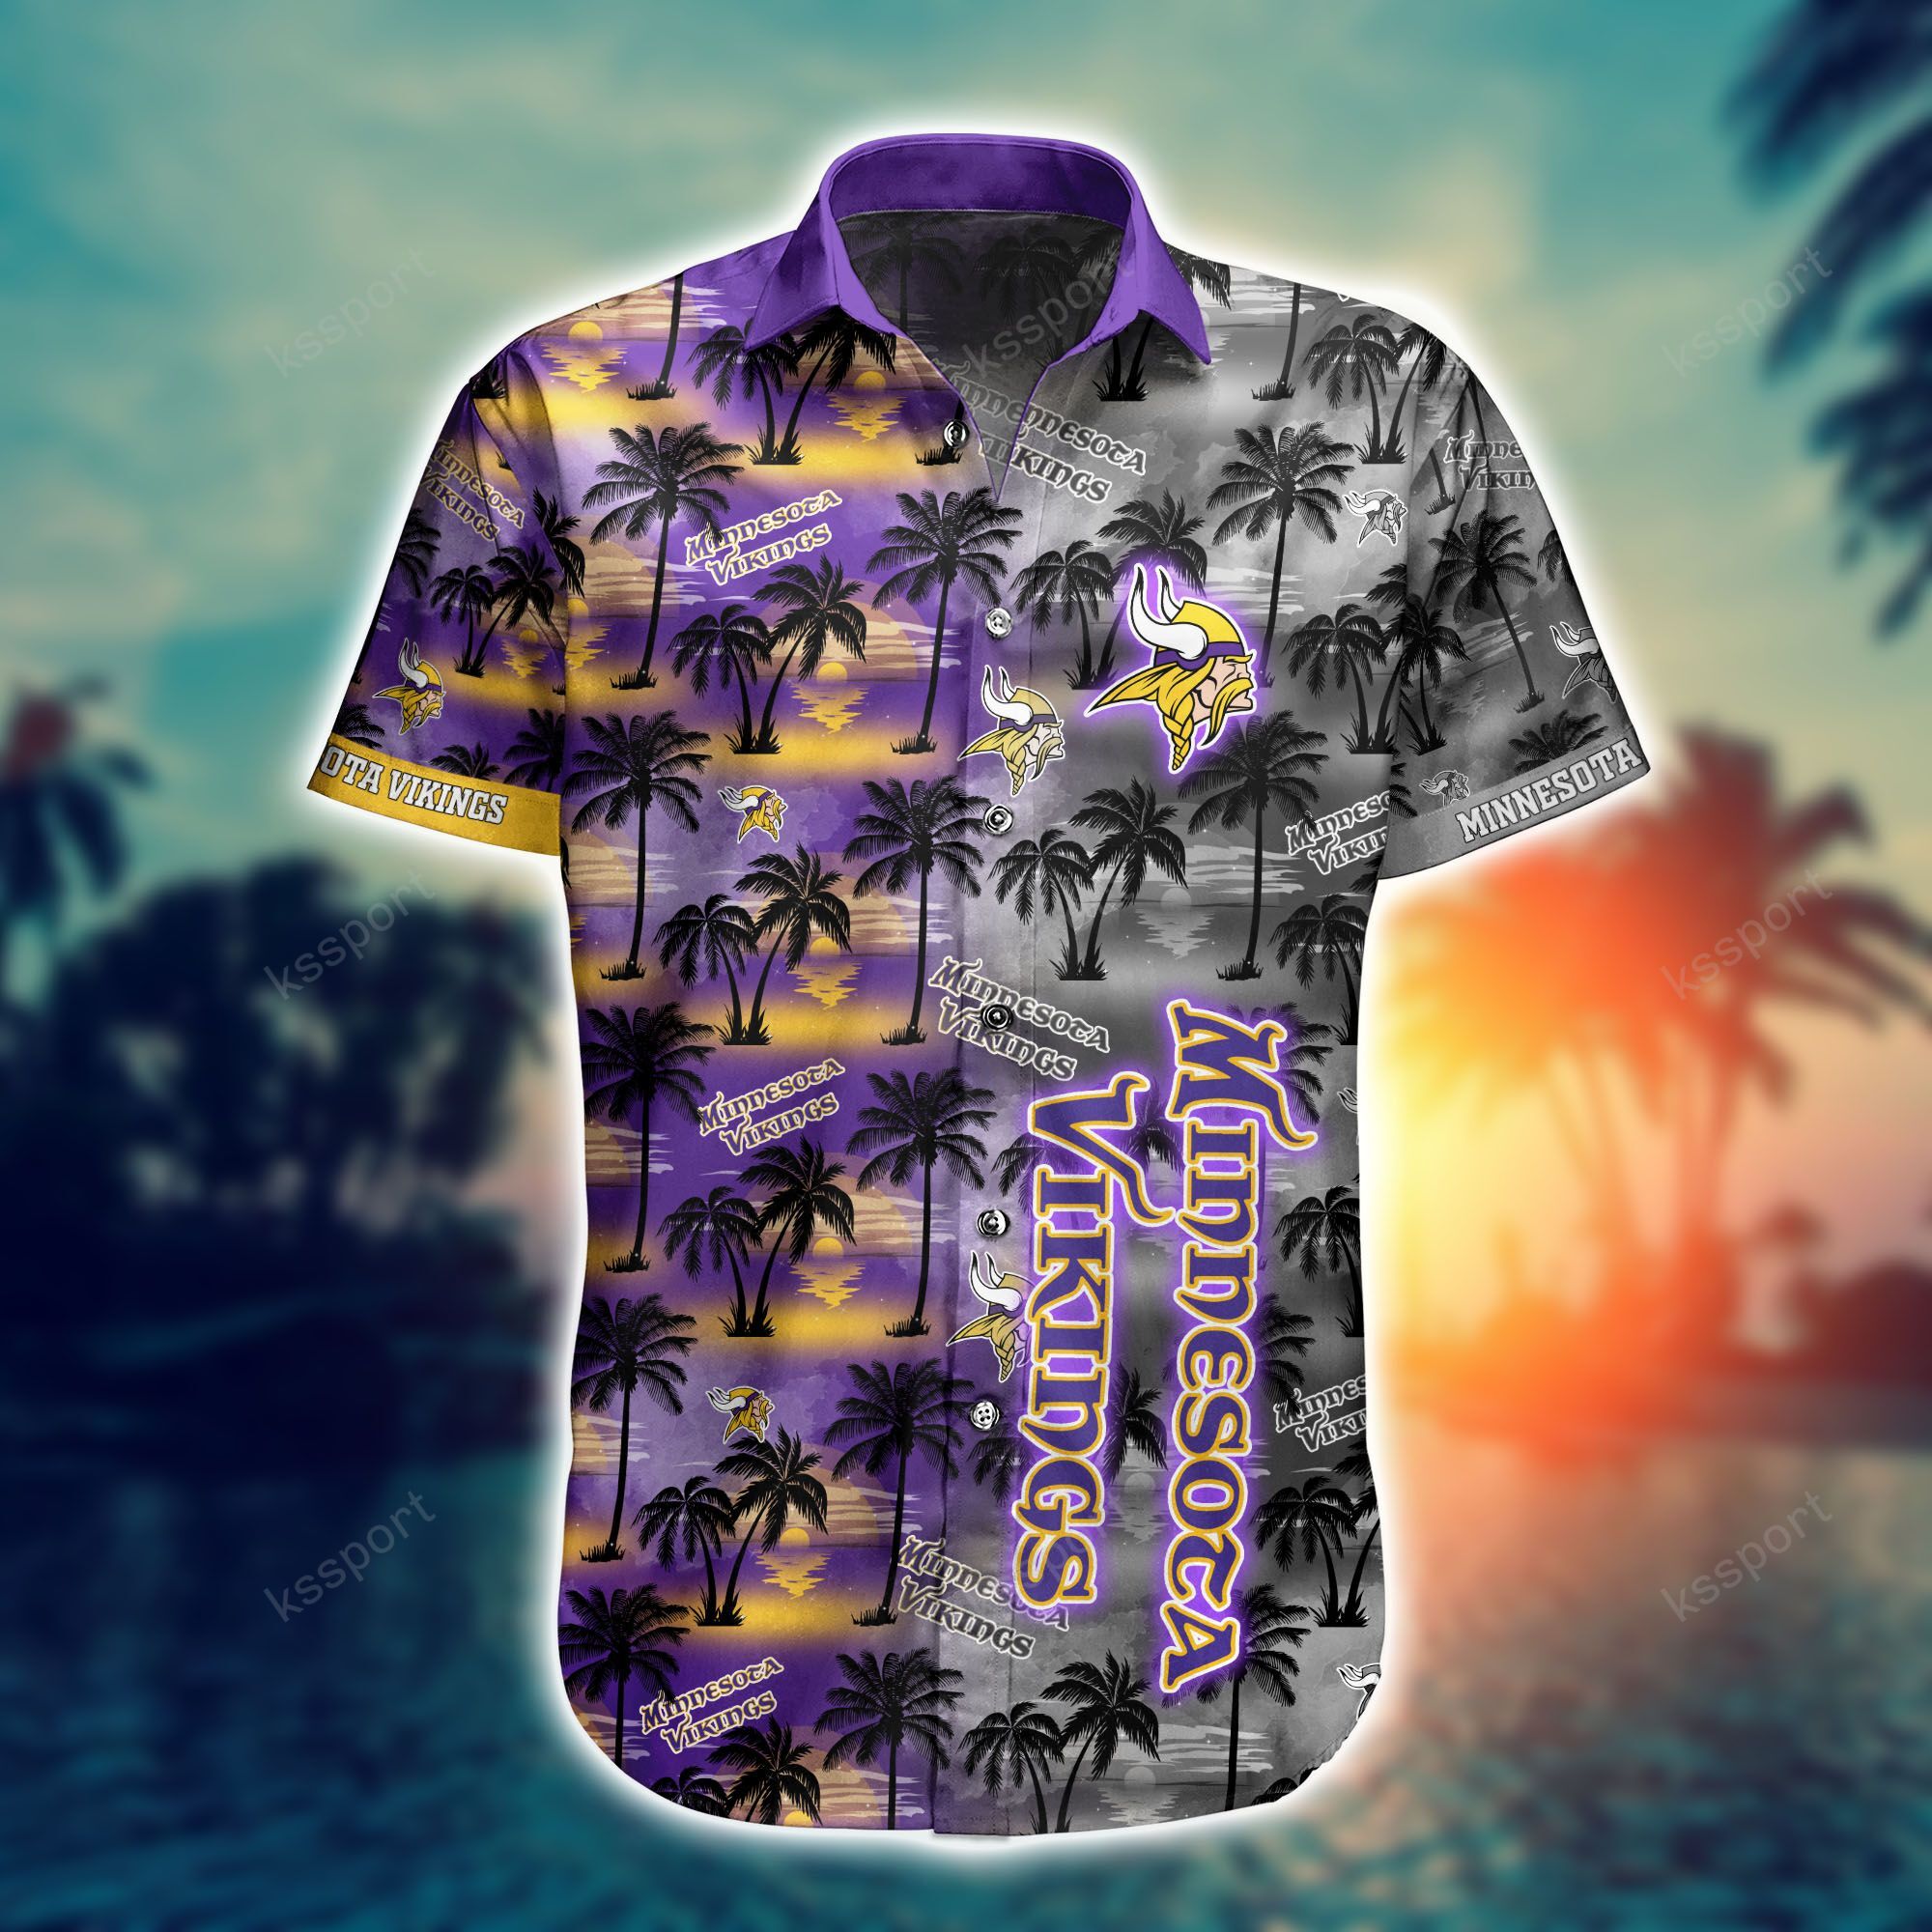 Top cool Hawaiian shirt 2022 - Make sure you get yours today before they run out! 210